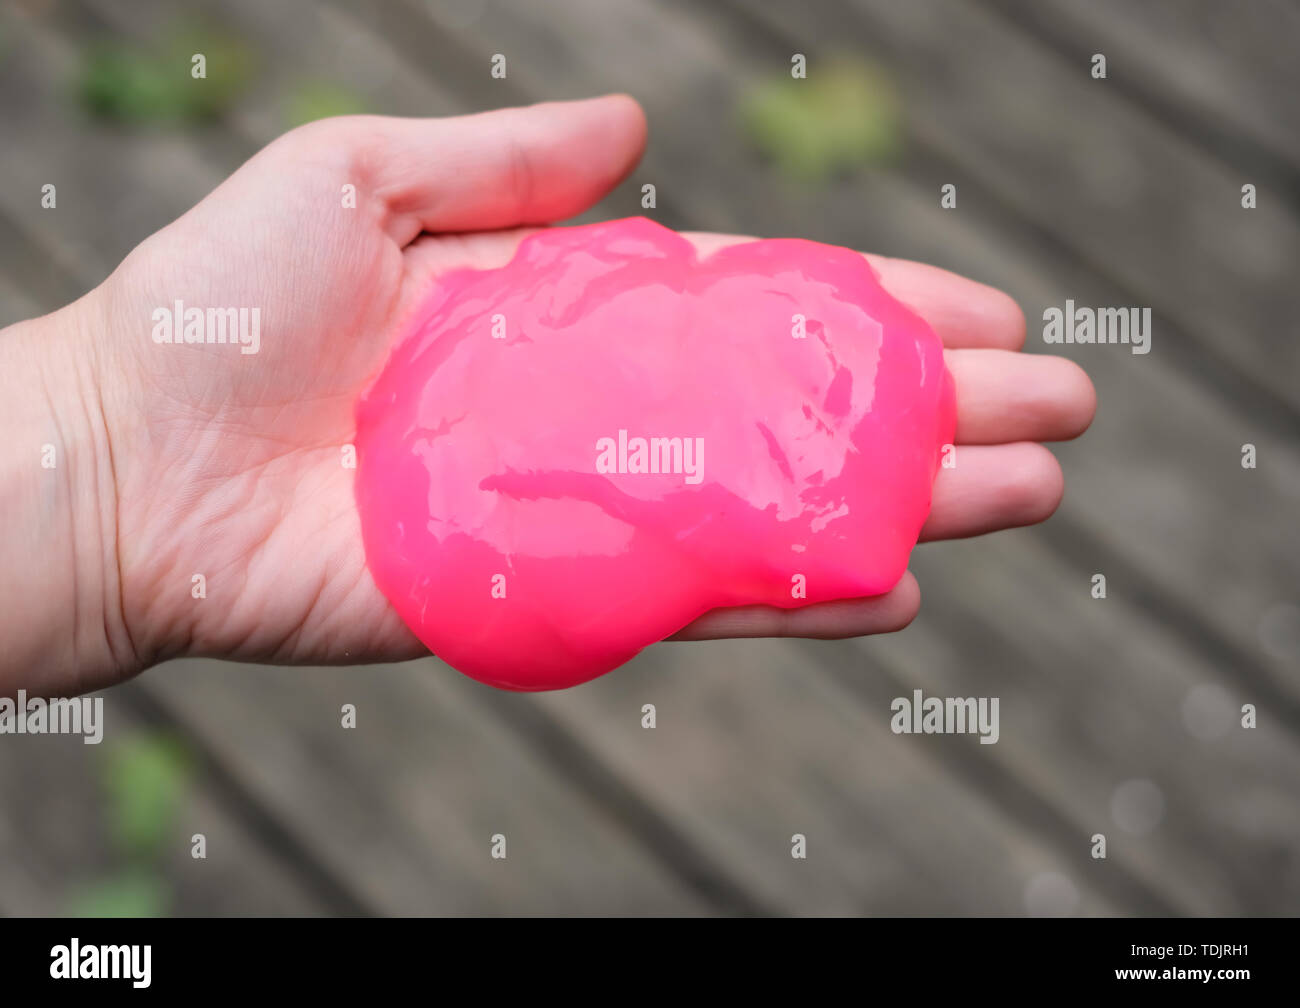 Pink anti stress toy slime in hand. Fighting anxiety and stress. Creative game experiment for children. Stock Photo